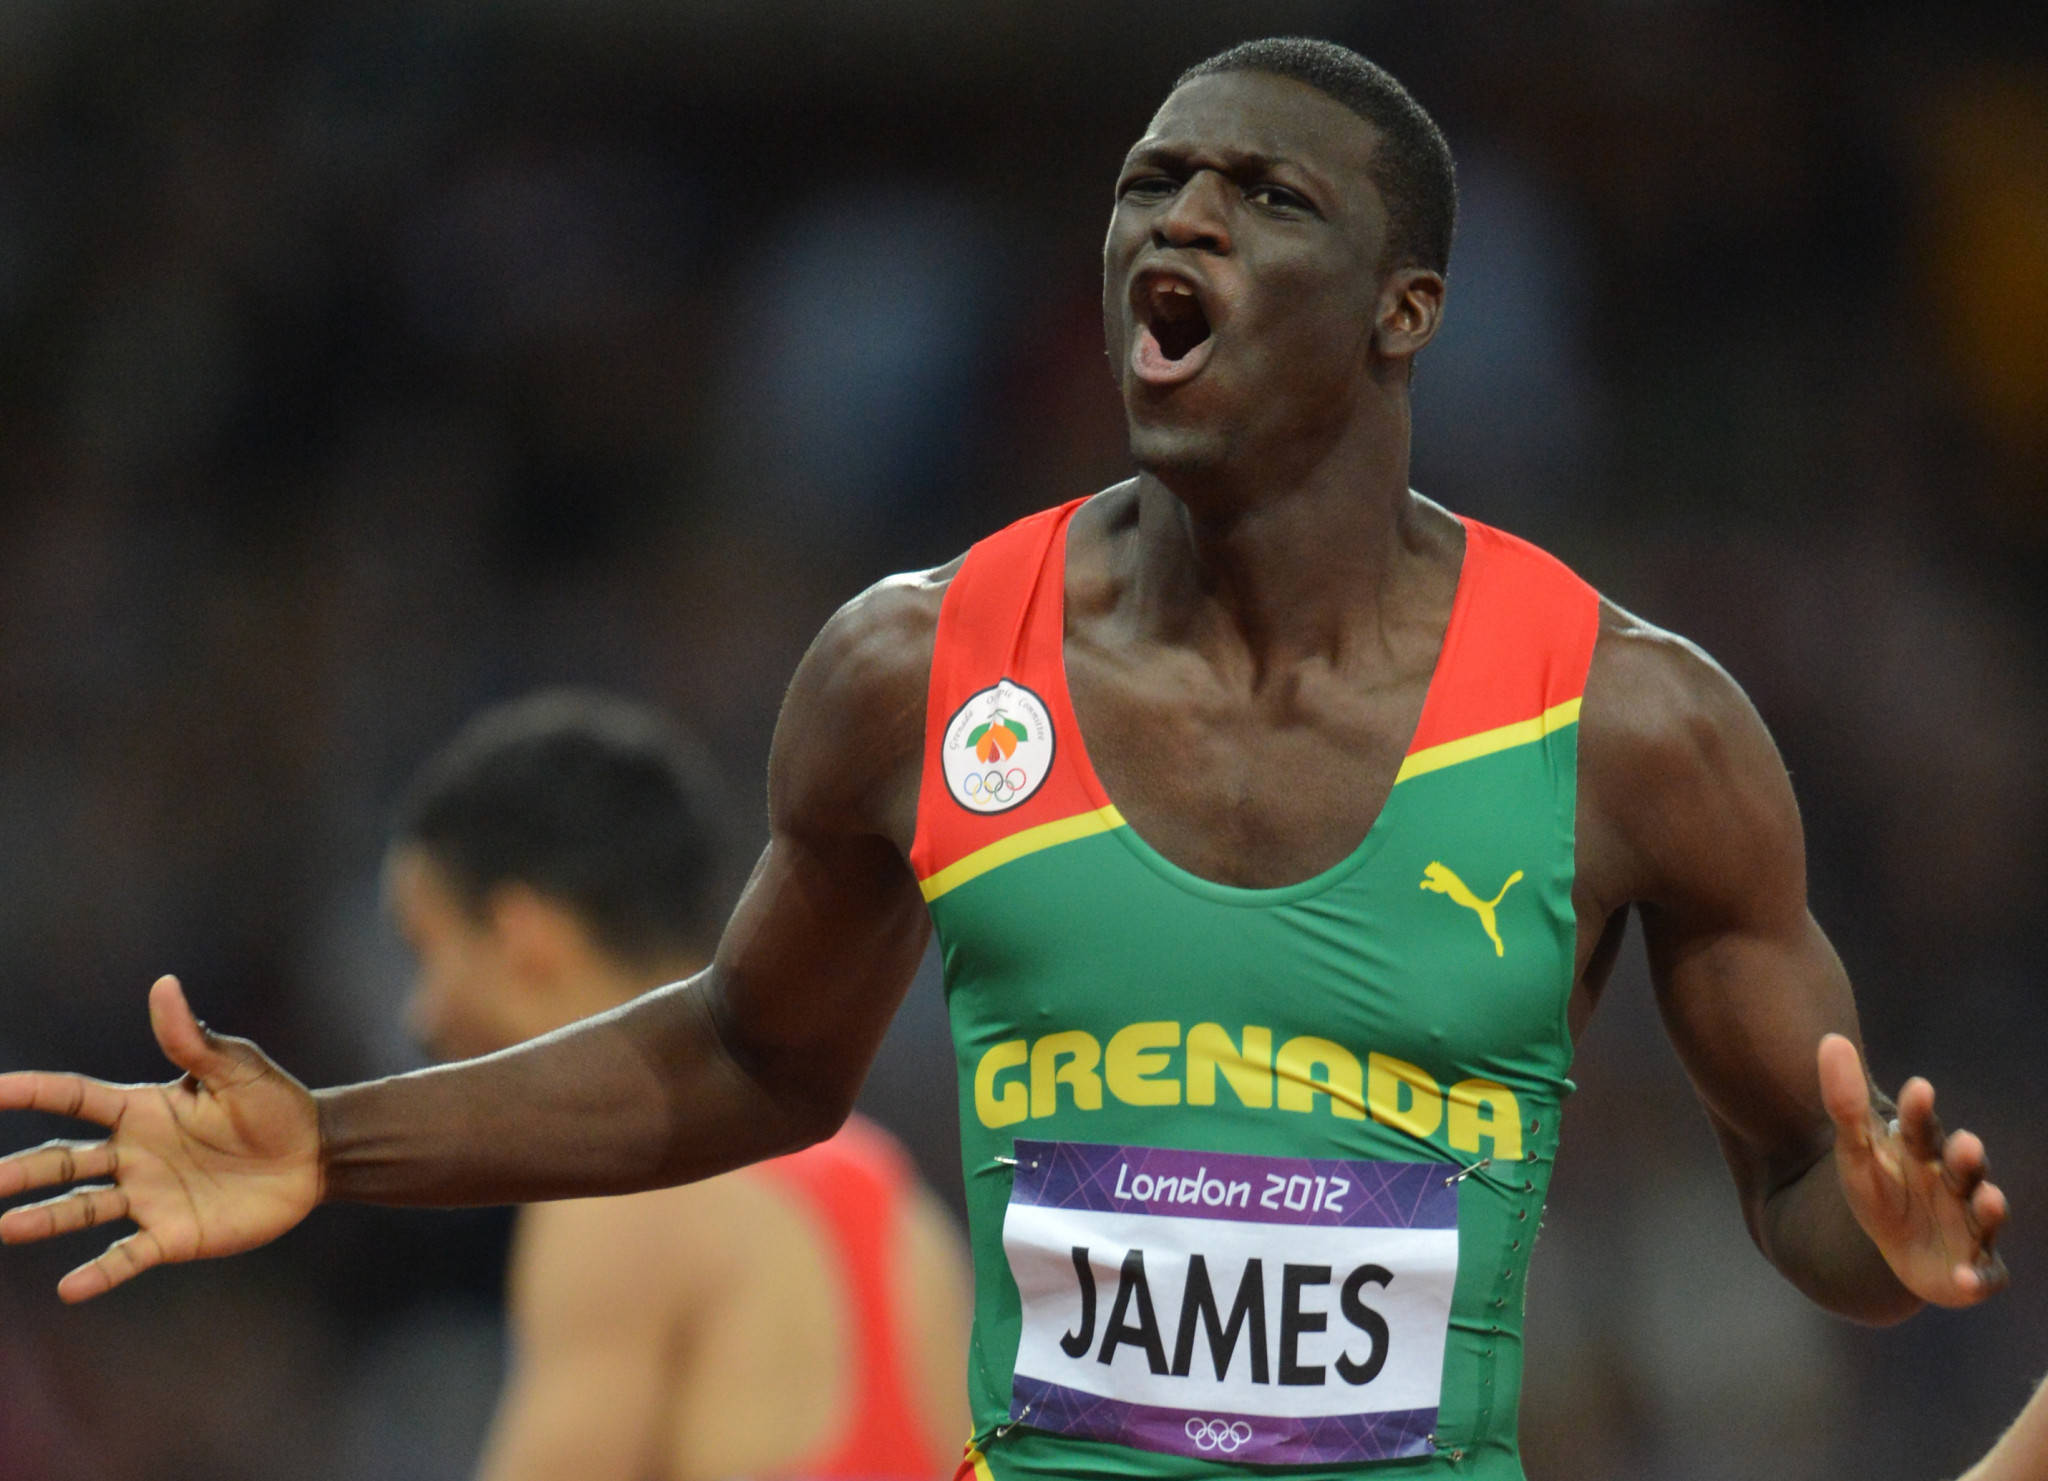 Kirani James won Olympic gold in the 400 metres at London 2012 ©Getty Images